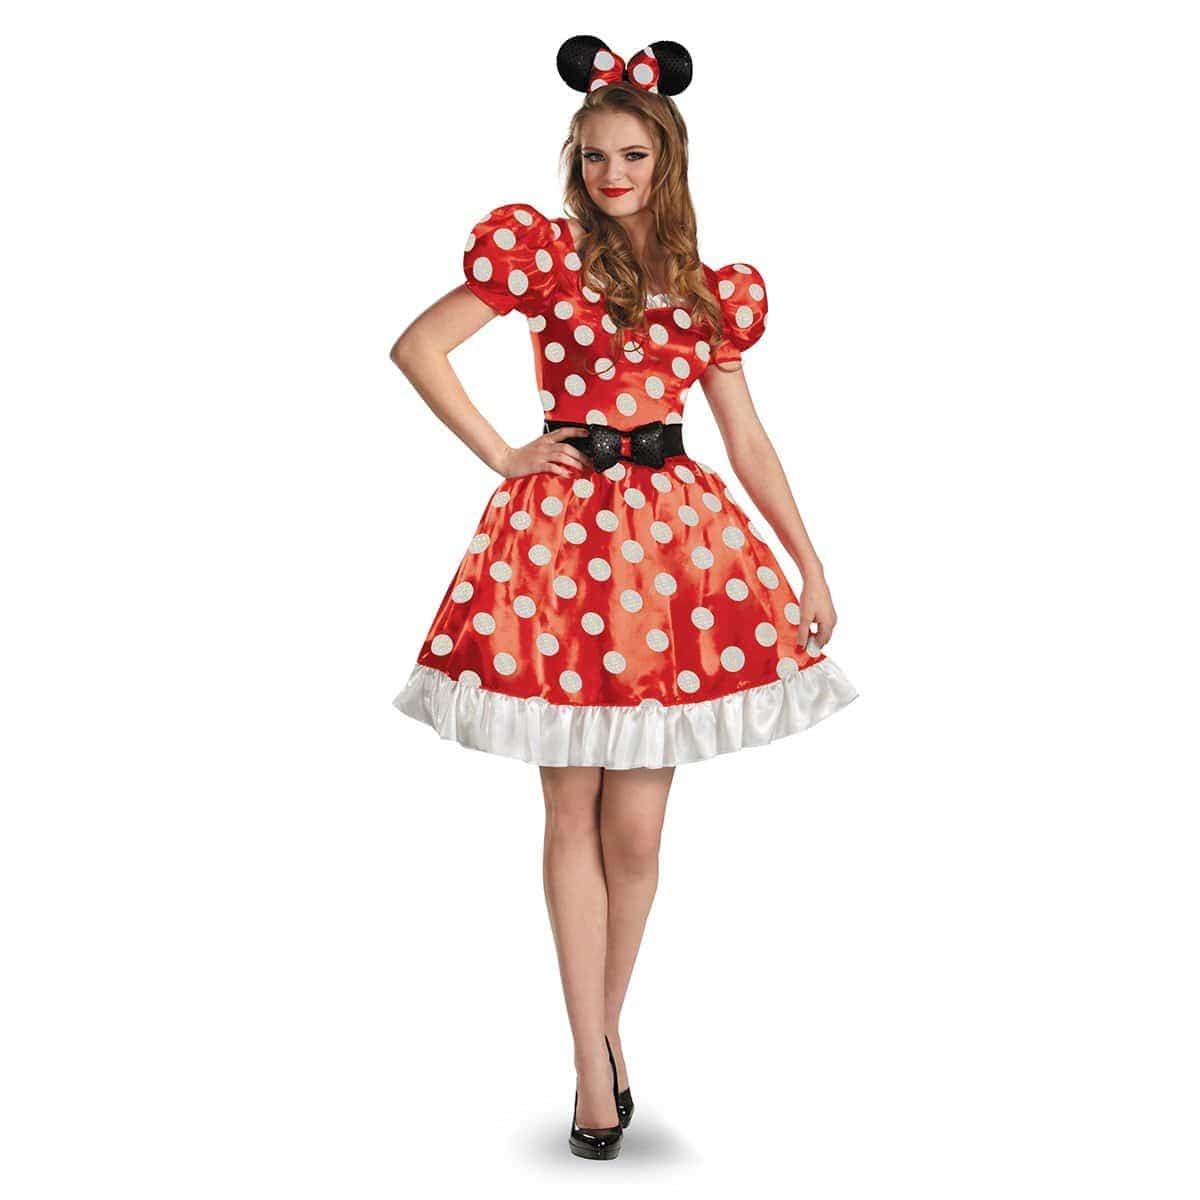 Buy Costumes Minnie Mouse Costume for Adults, Disney sold at Party Expert